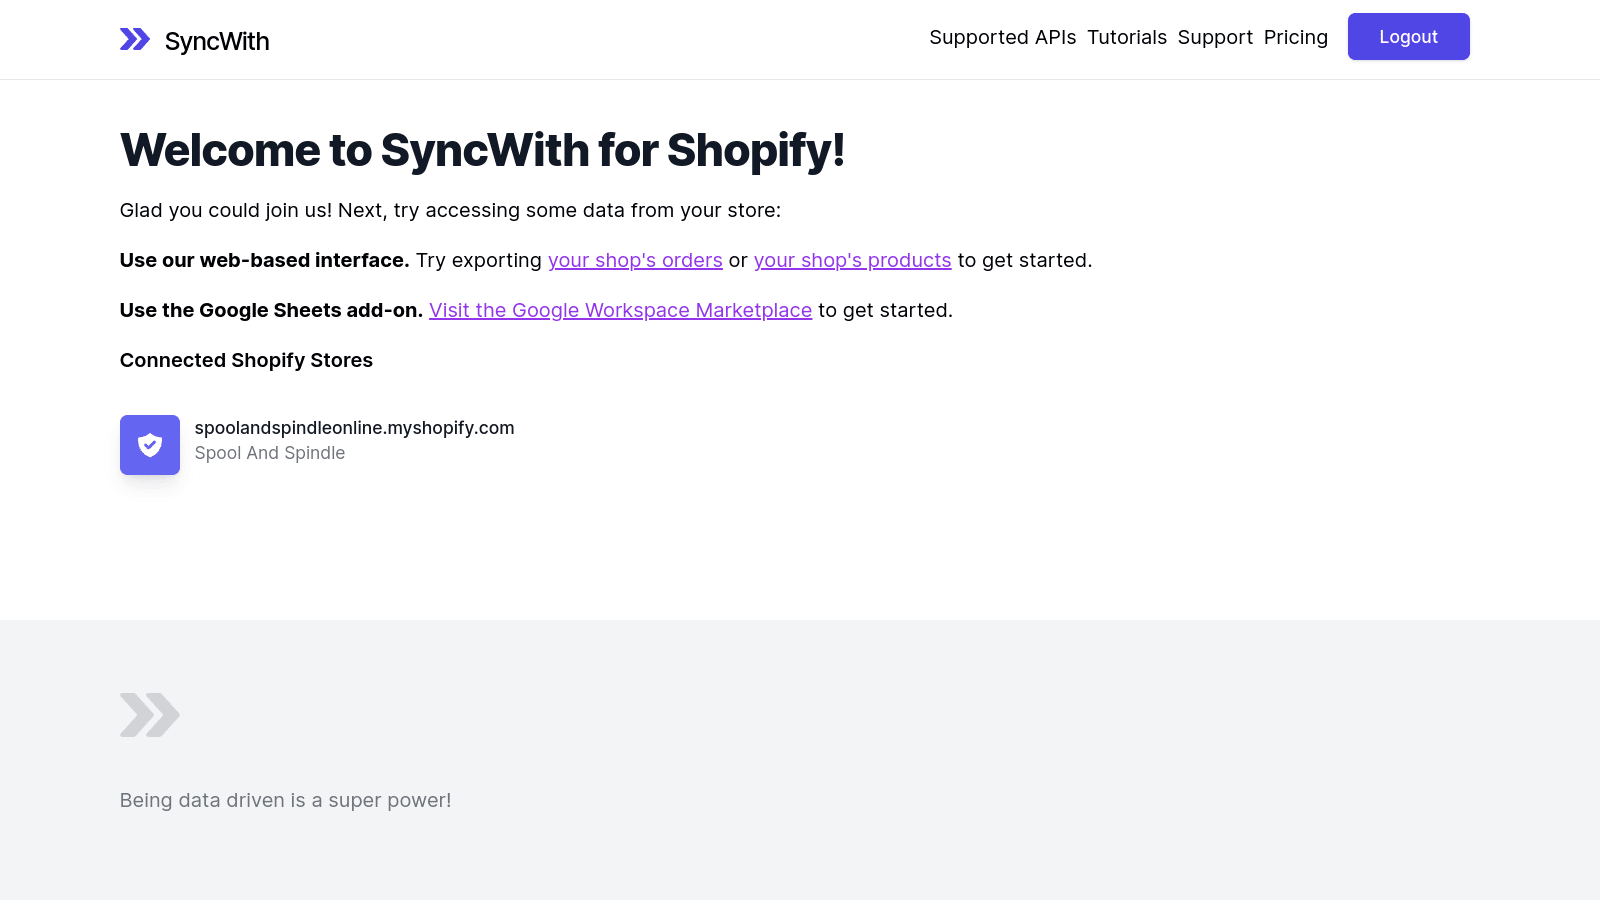 SyncWith Data Export Reports